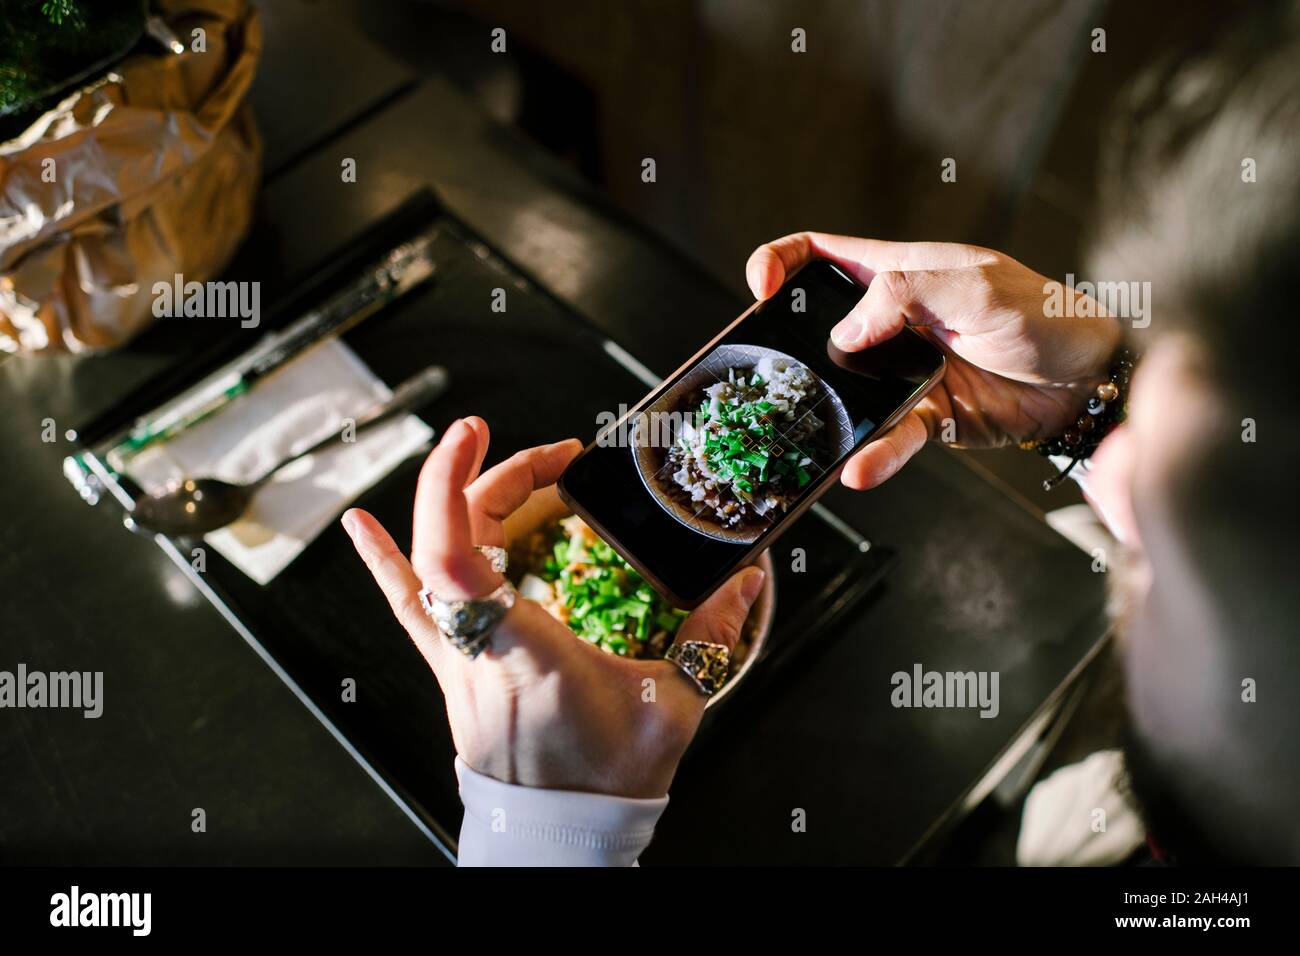 Man's hands with smartphone taking a picture of his dinner Stock Photo